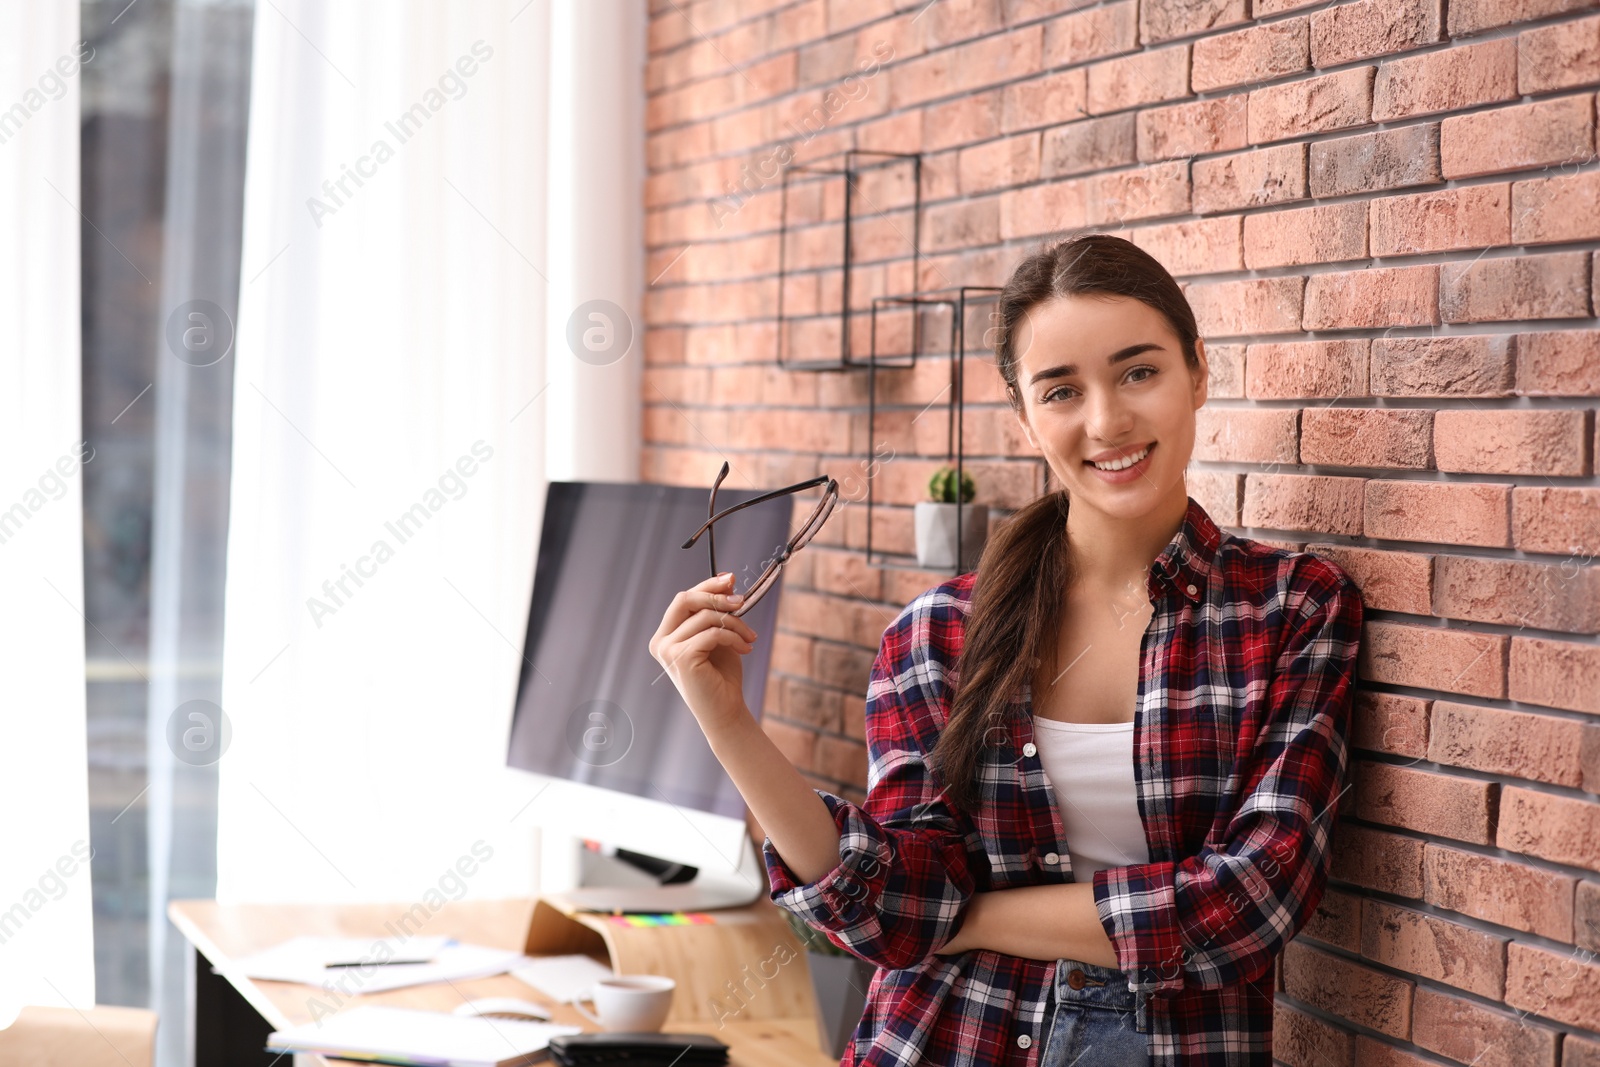 Photo of Professional journalist near brick wall in office